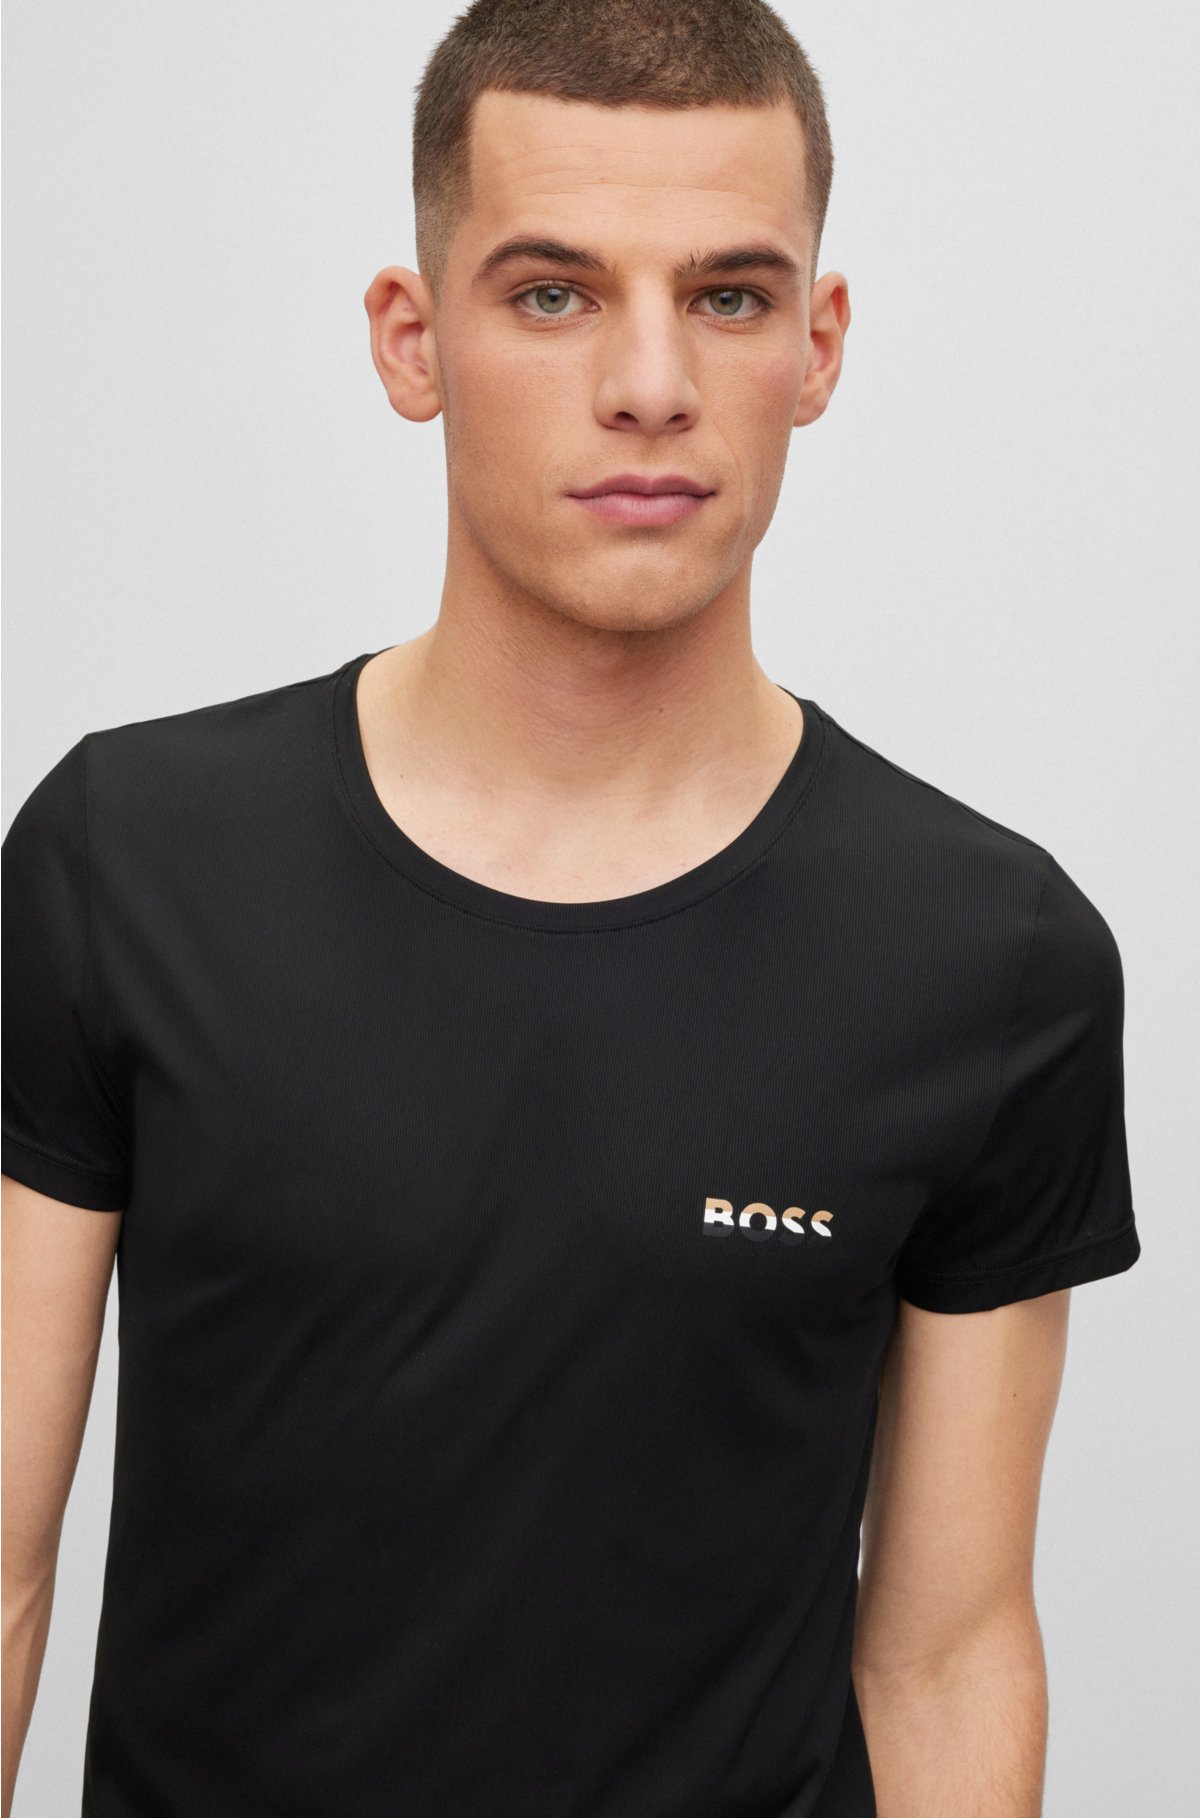 BOSS - T-shirt in stretch fabric with